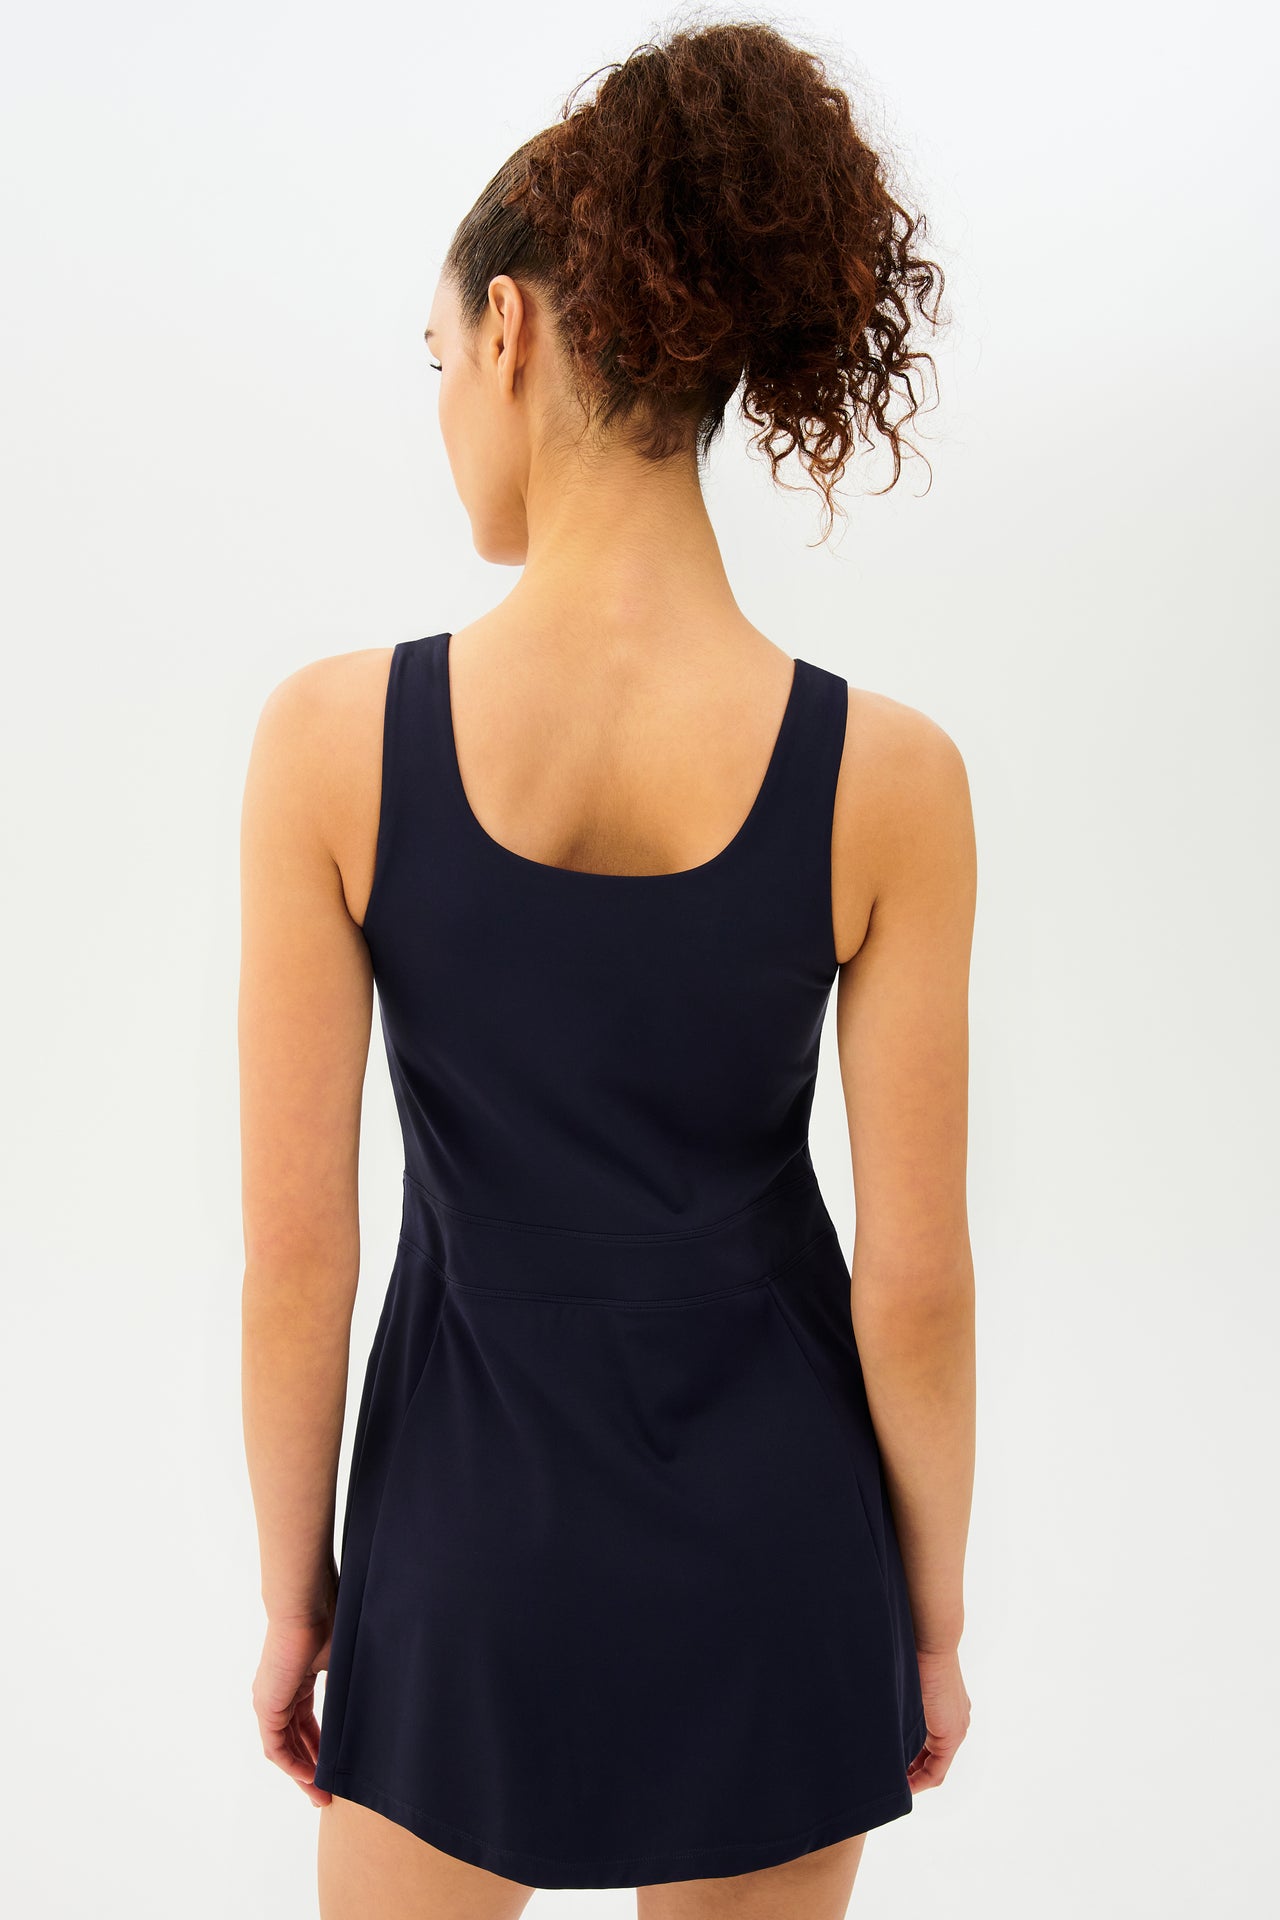 The back view of a woman in the Martina Rigor Dress by SPLITS59 made of Rigor fabric.